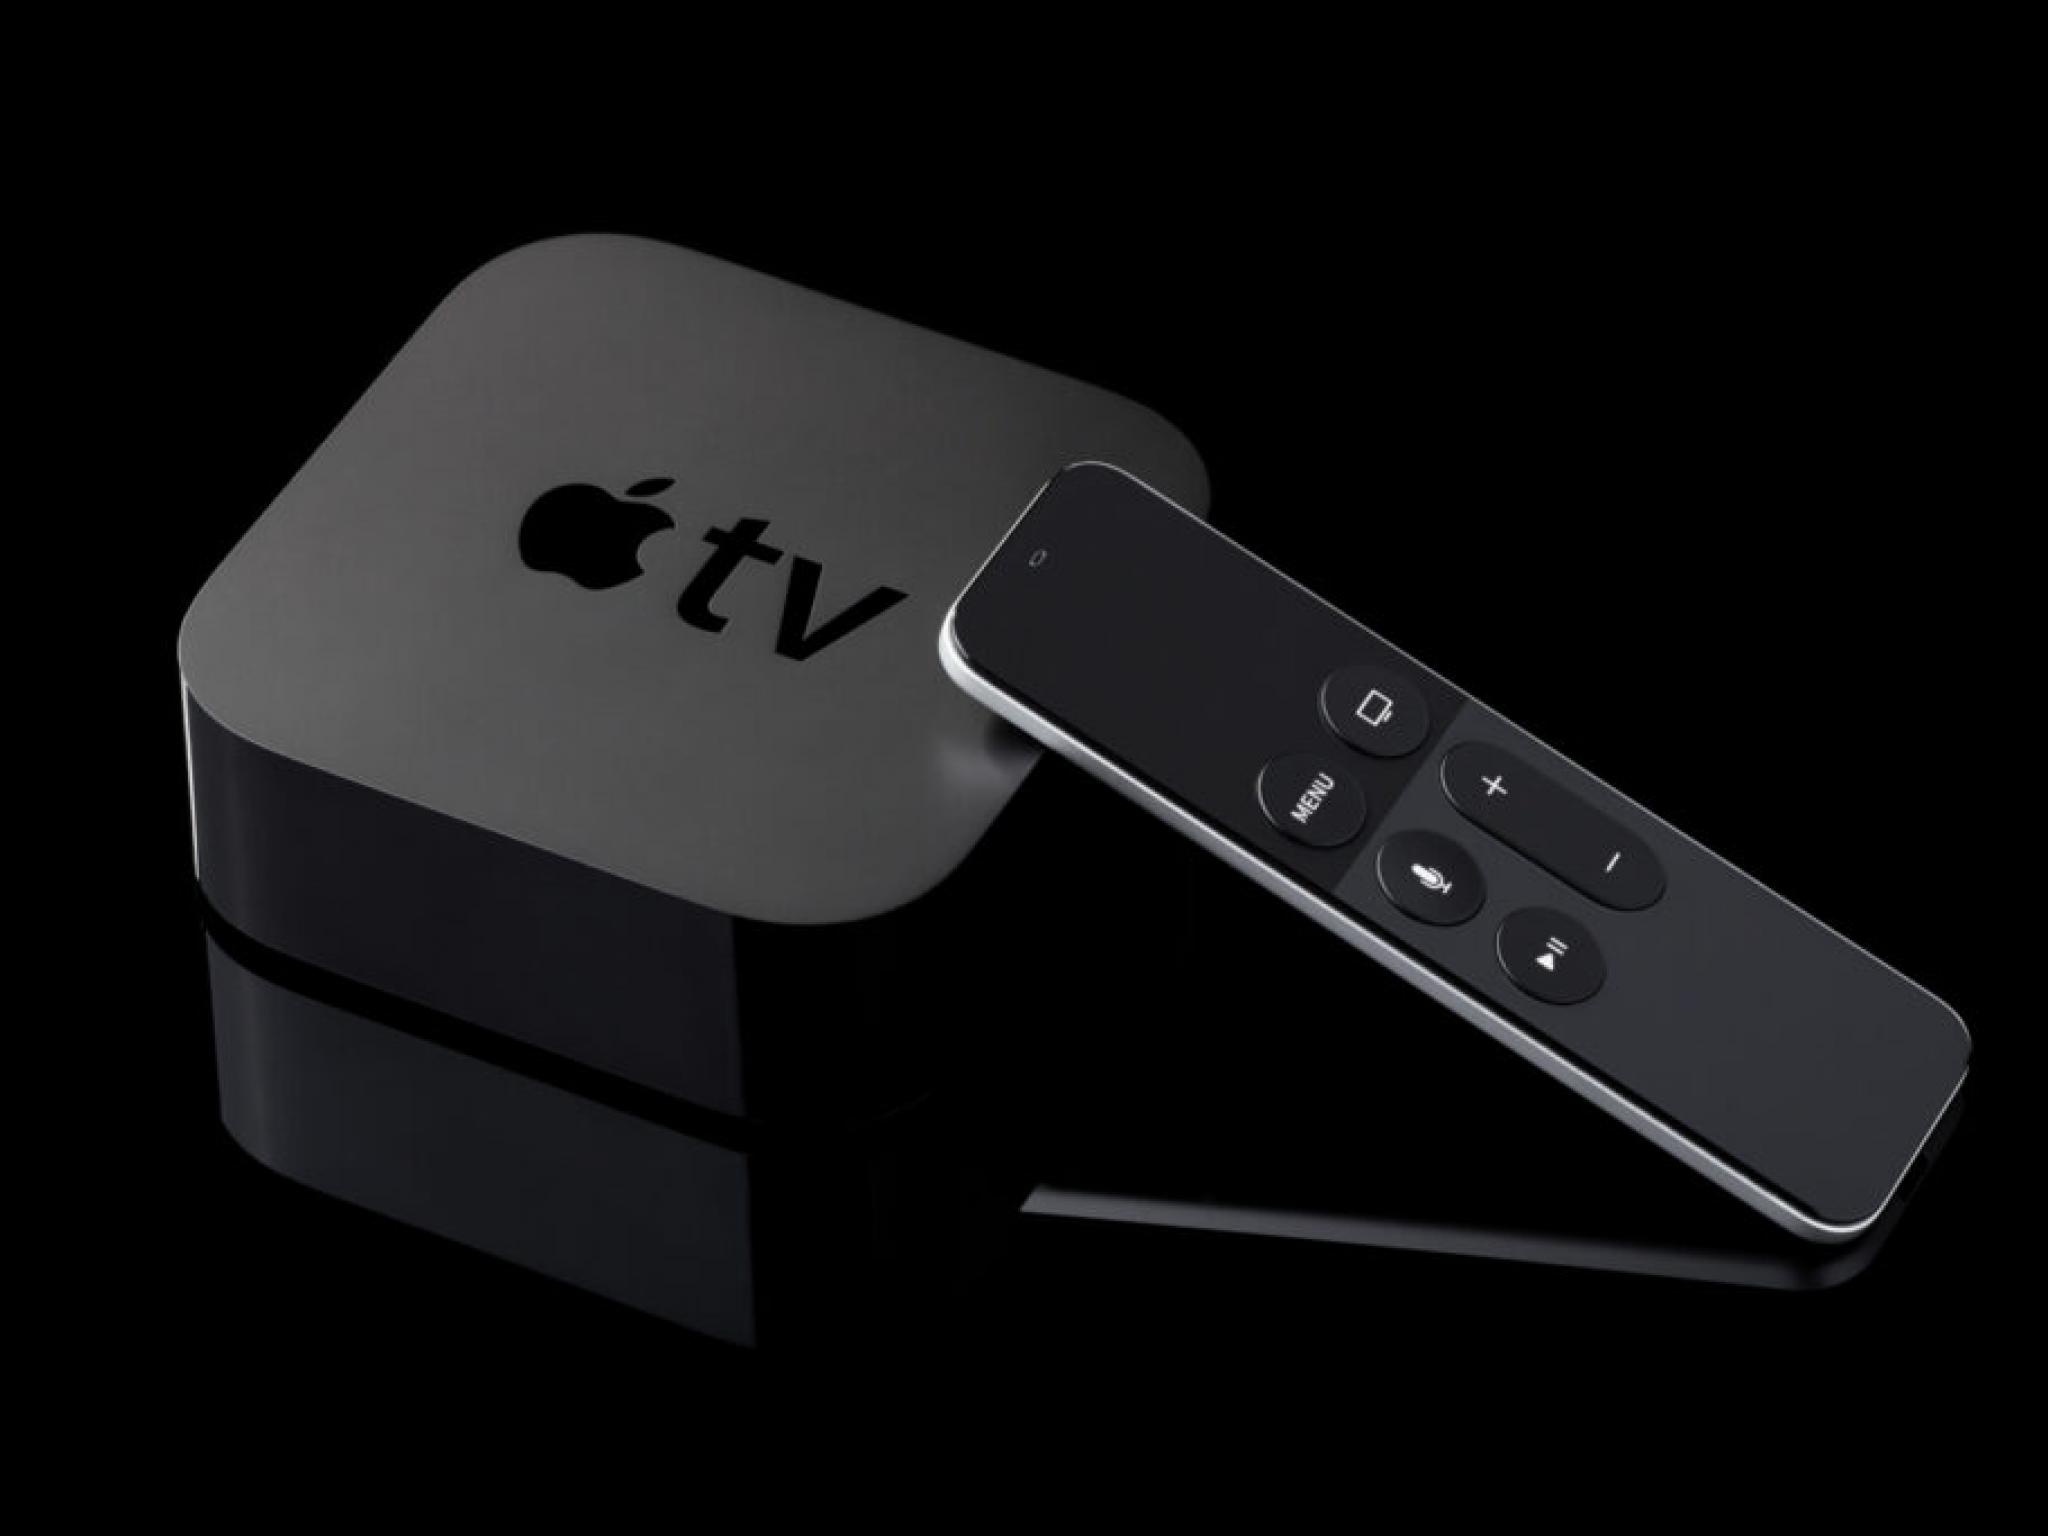  apple-tv-takes-on-netflix-with-new-hollywood-licensing-deals 